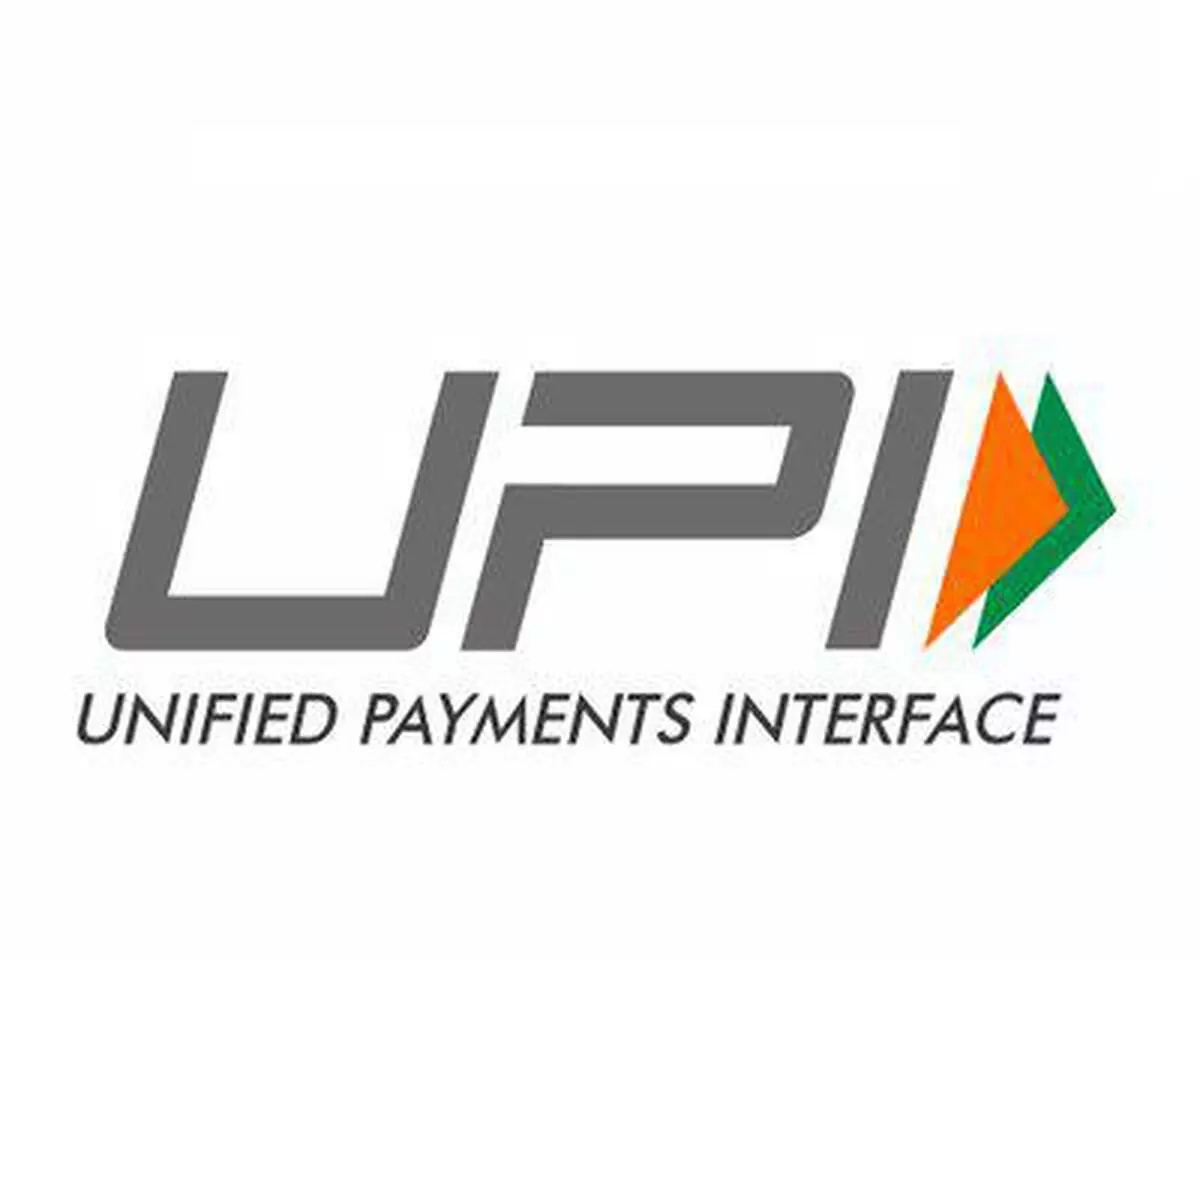 UPI-PayNow linkage will allow residents in Singapore and India to undertake faster and cost-effective digital transfers